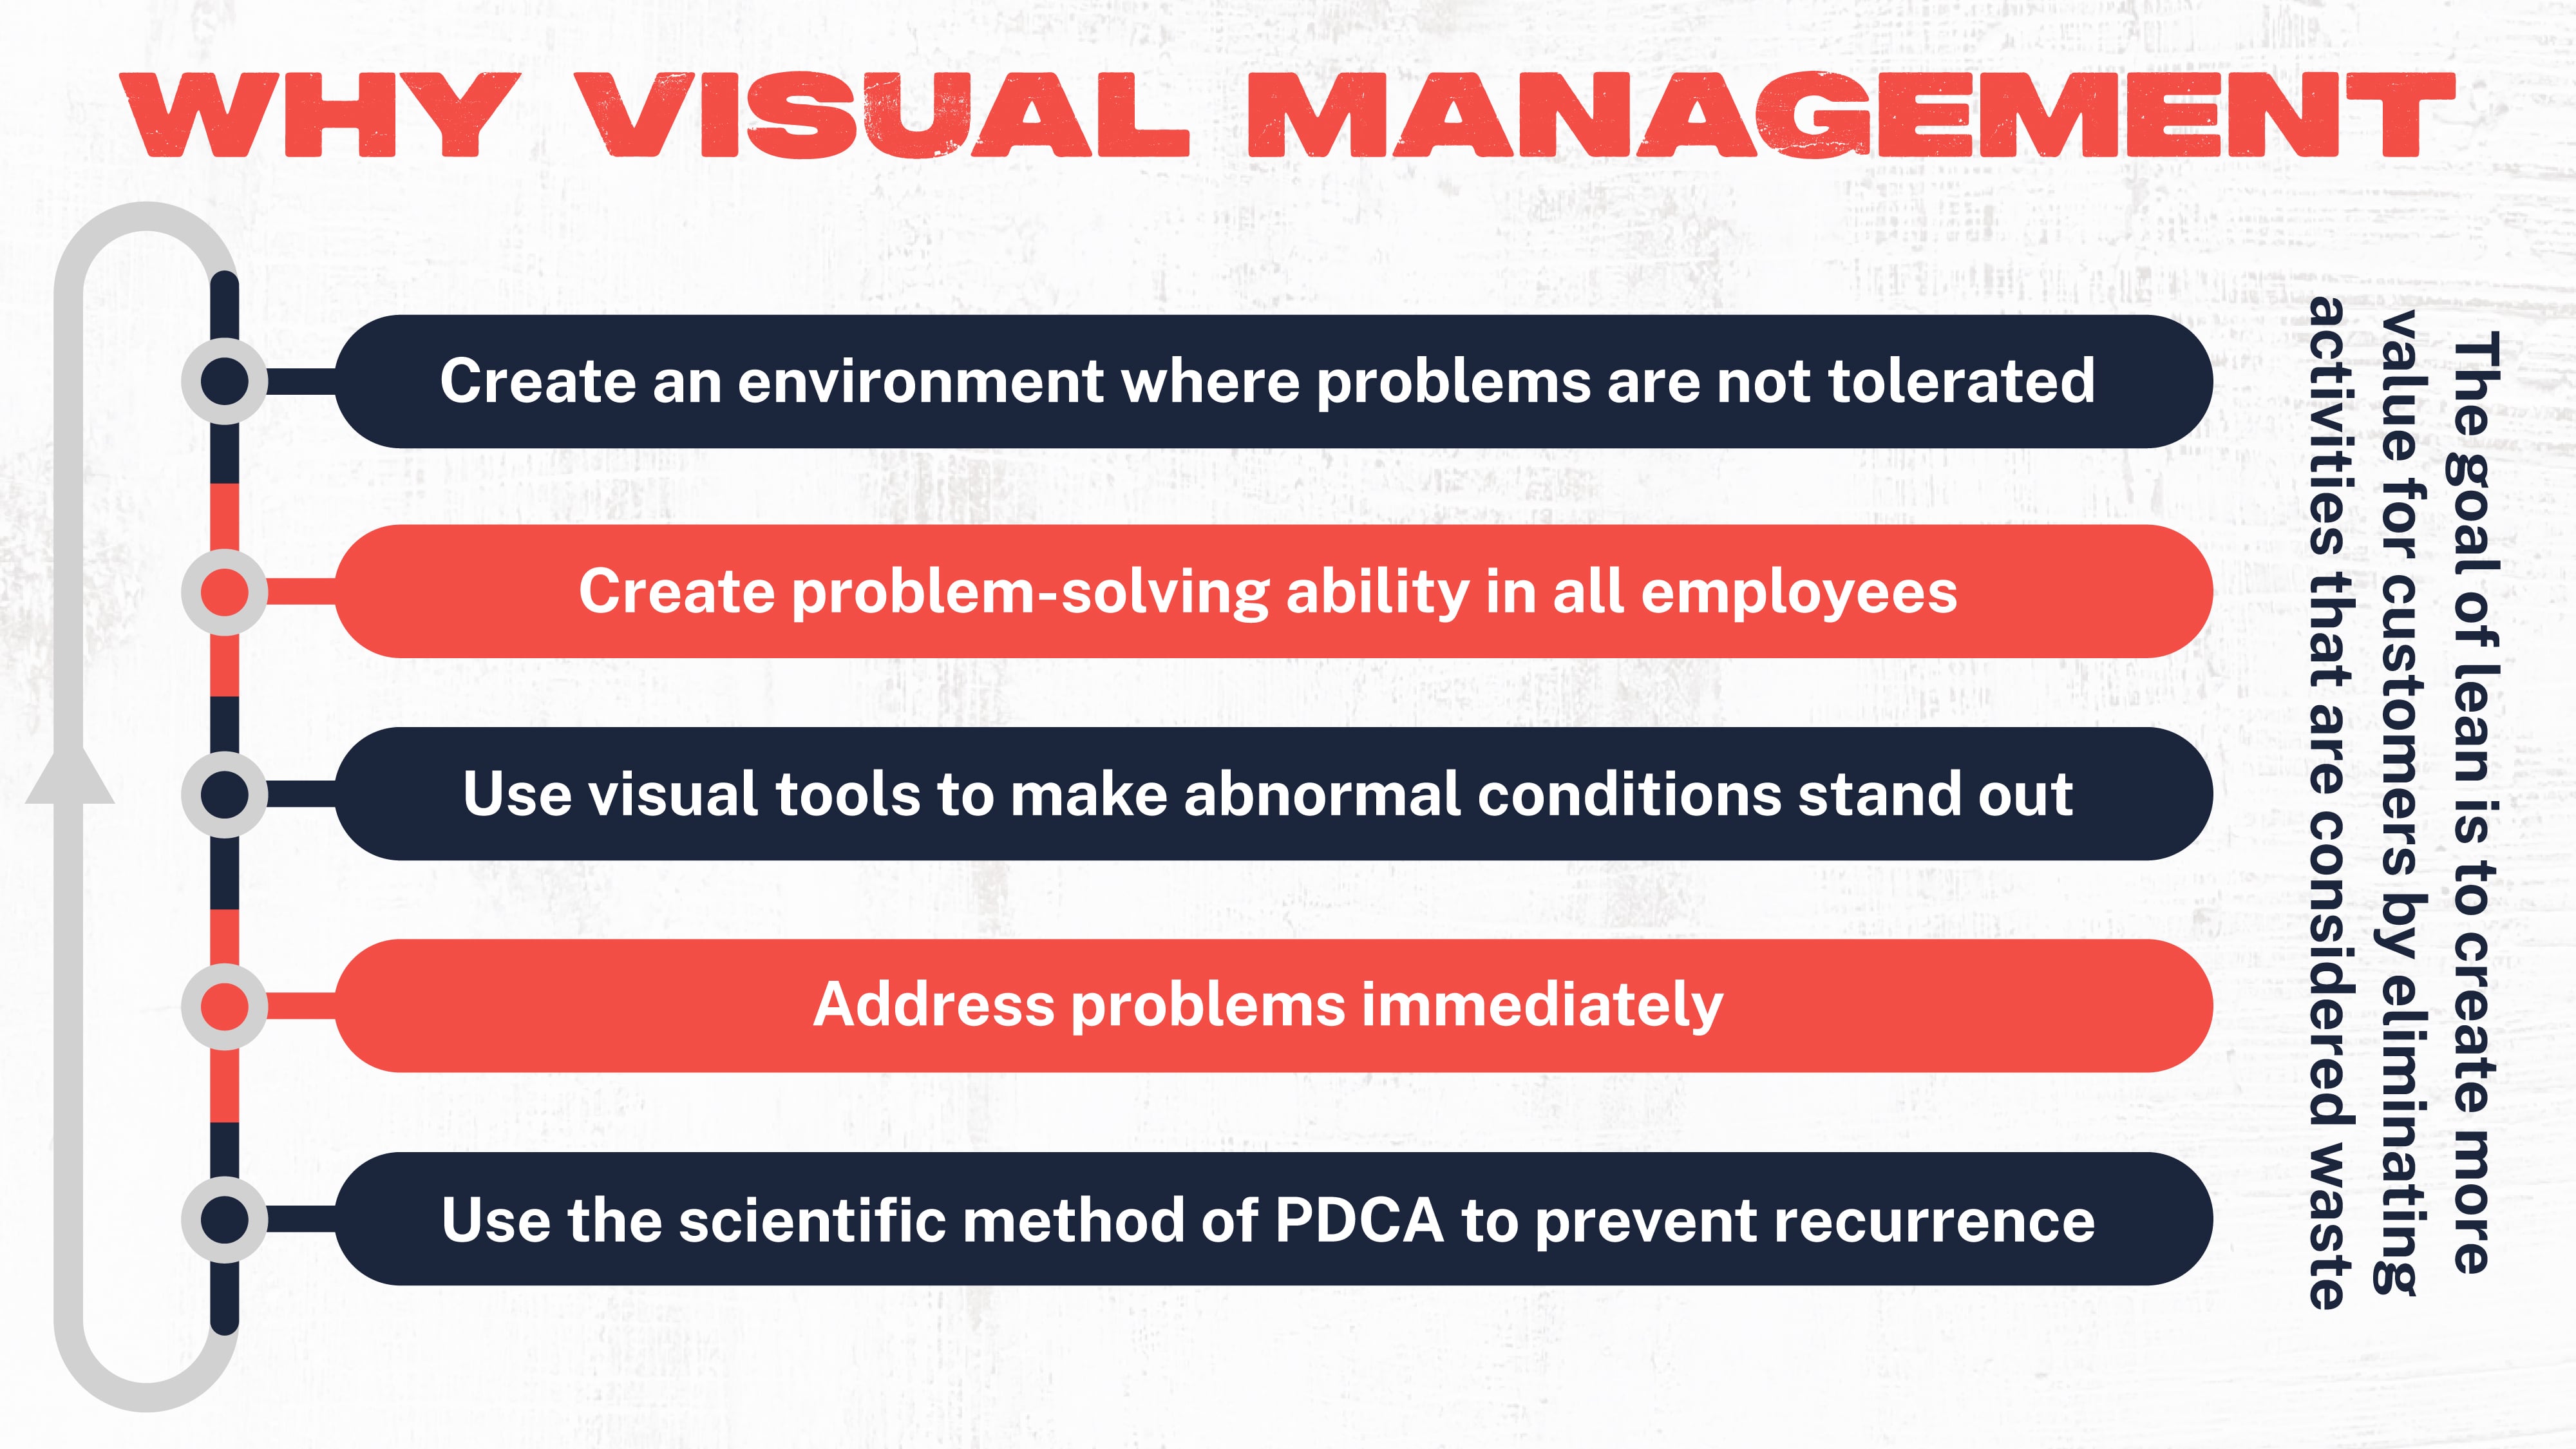 WHY VISUAL MANAGEMENT